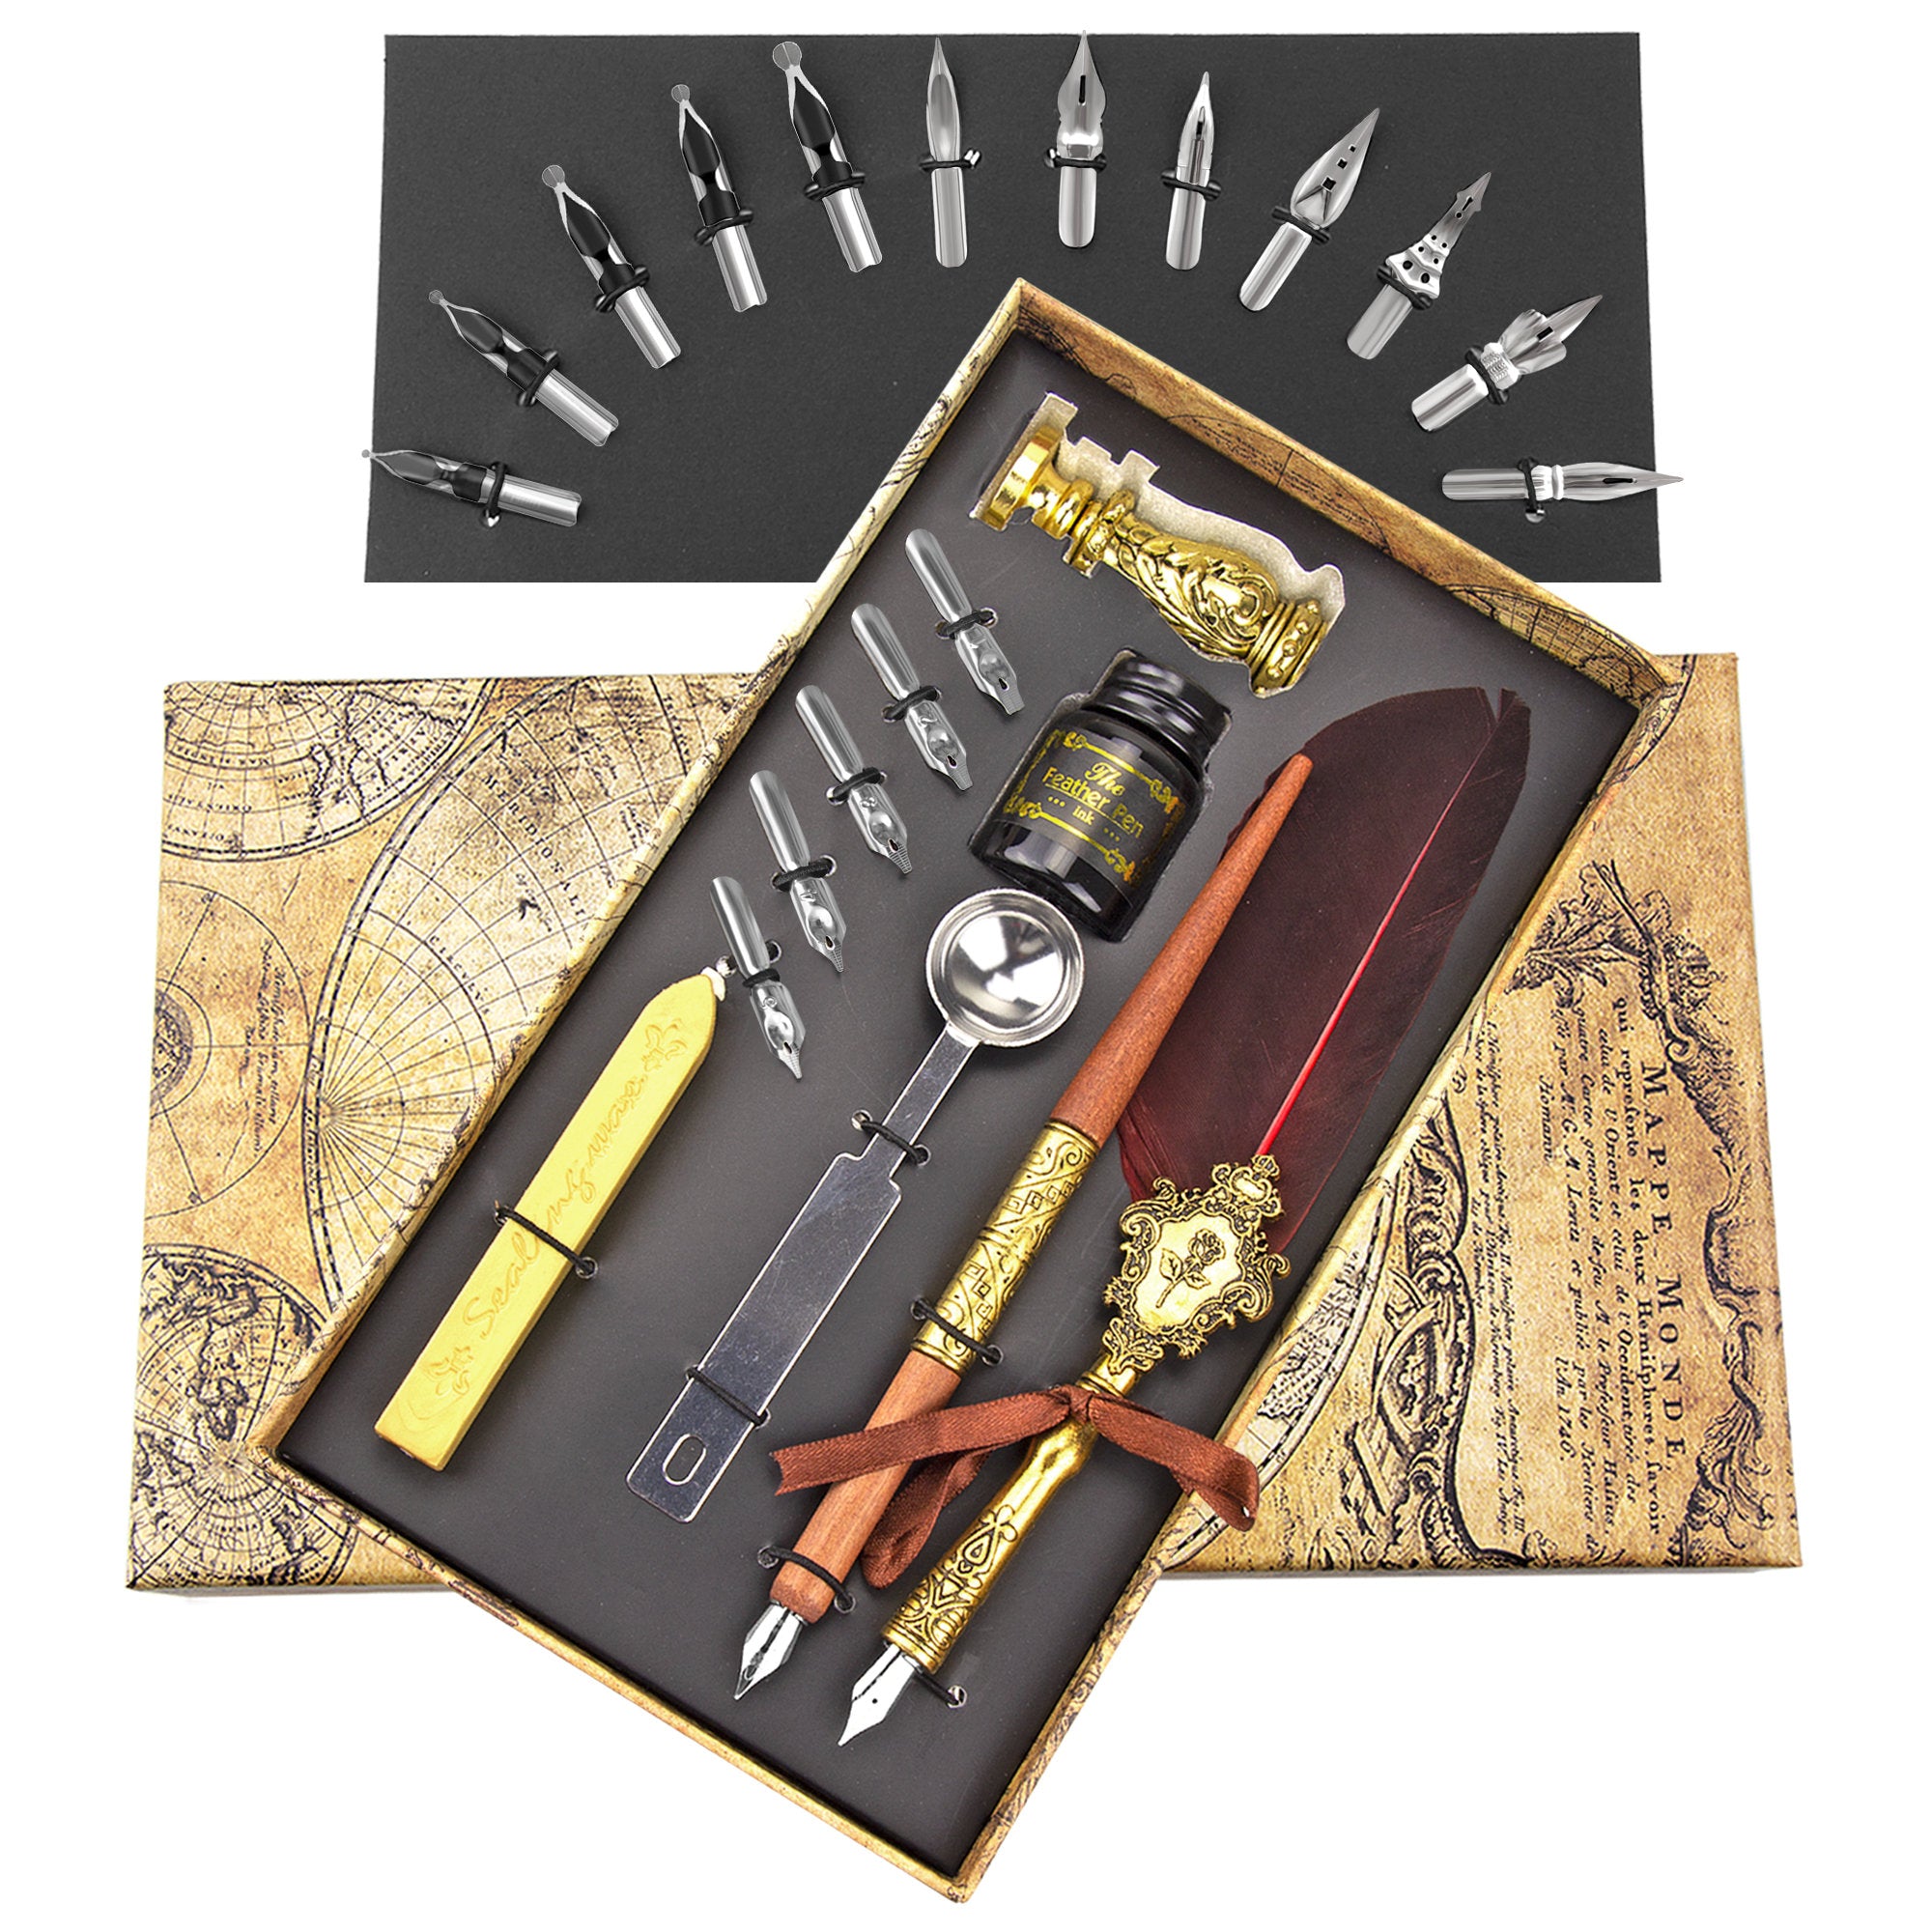 Quill Pen Feather Pen and Ink Set,Calligraphy Pen Set for